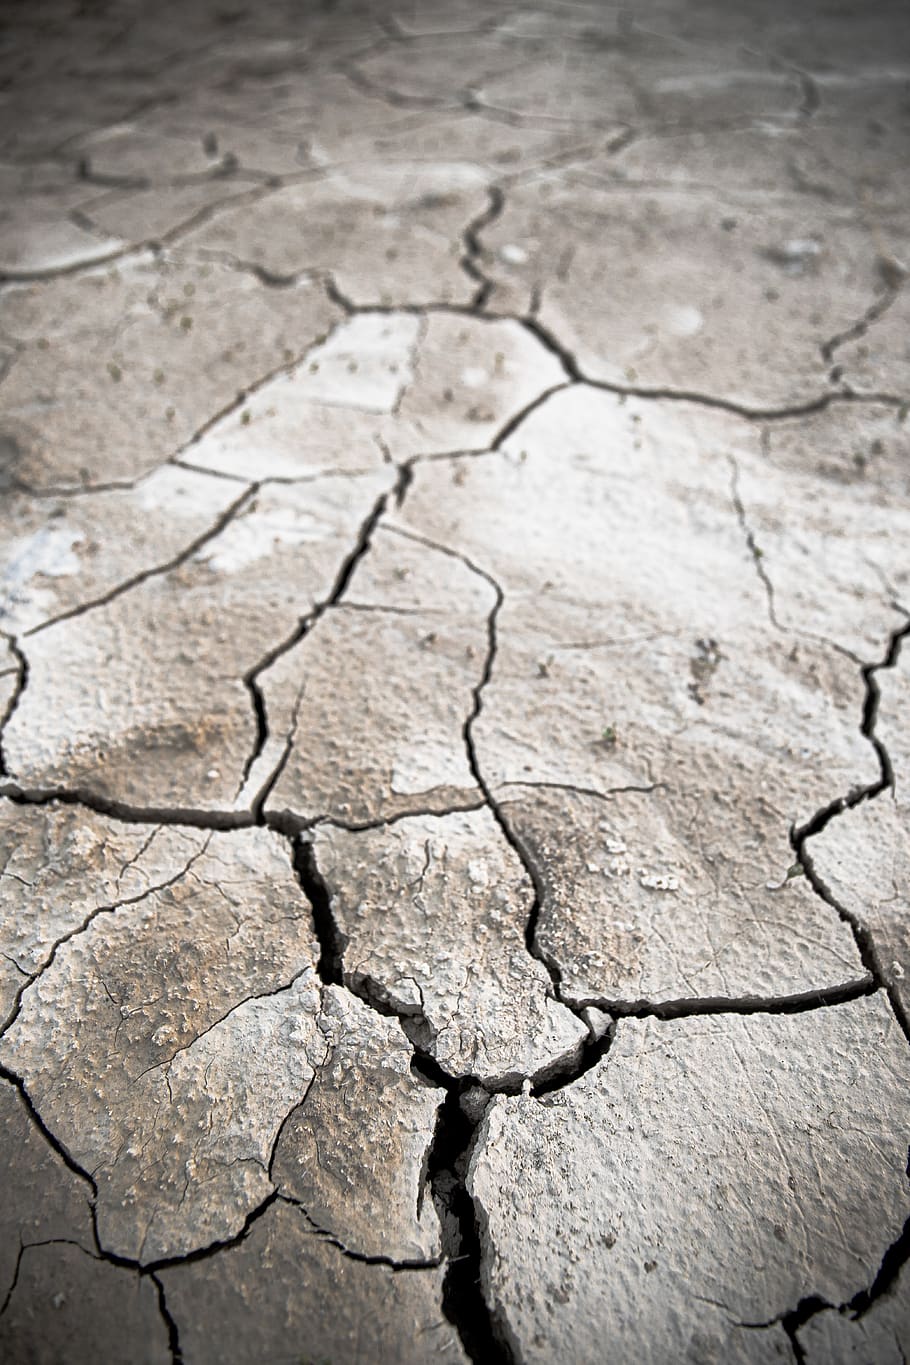 dry, dryout, climate, change, environment, desert, earth, disaster, water, landscape